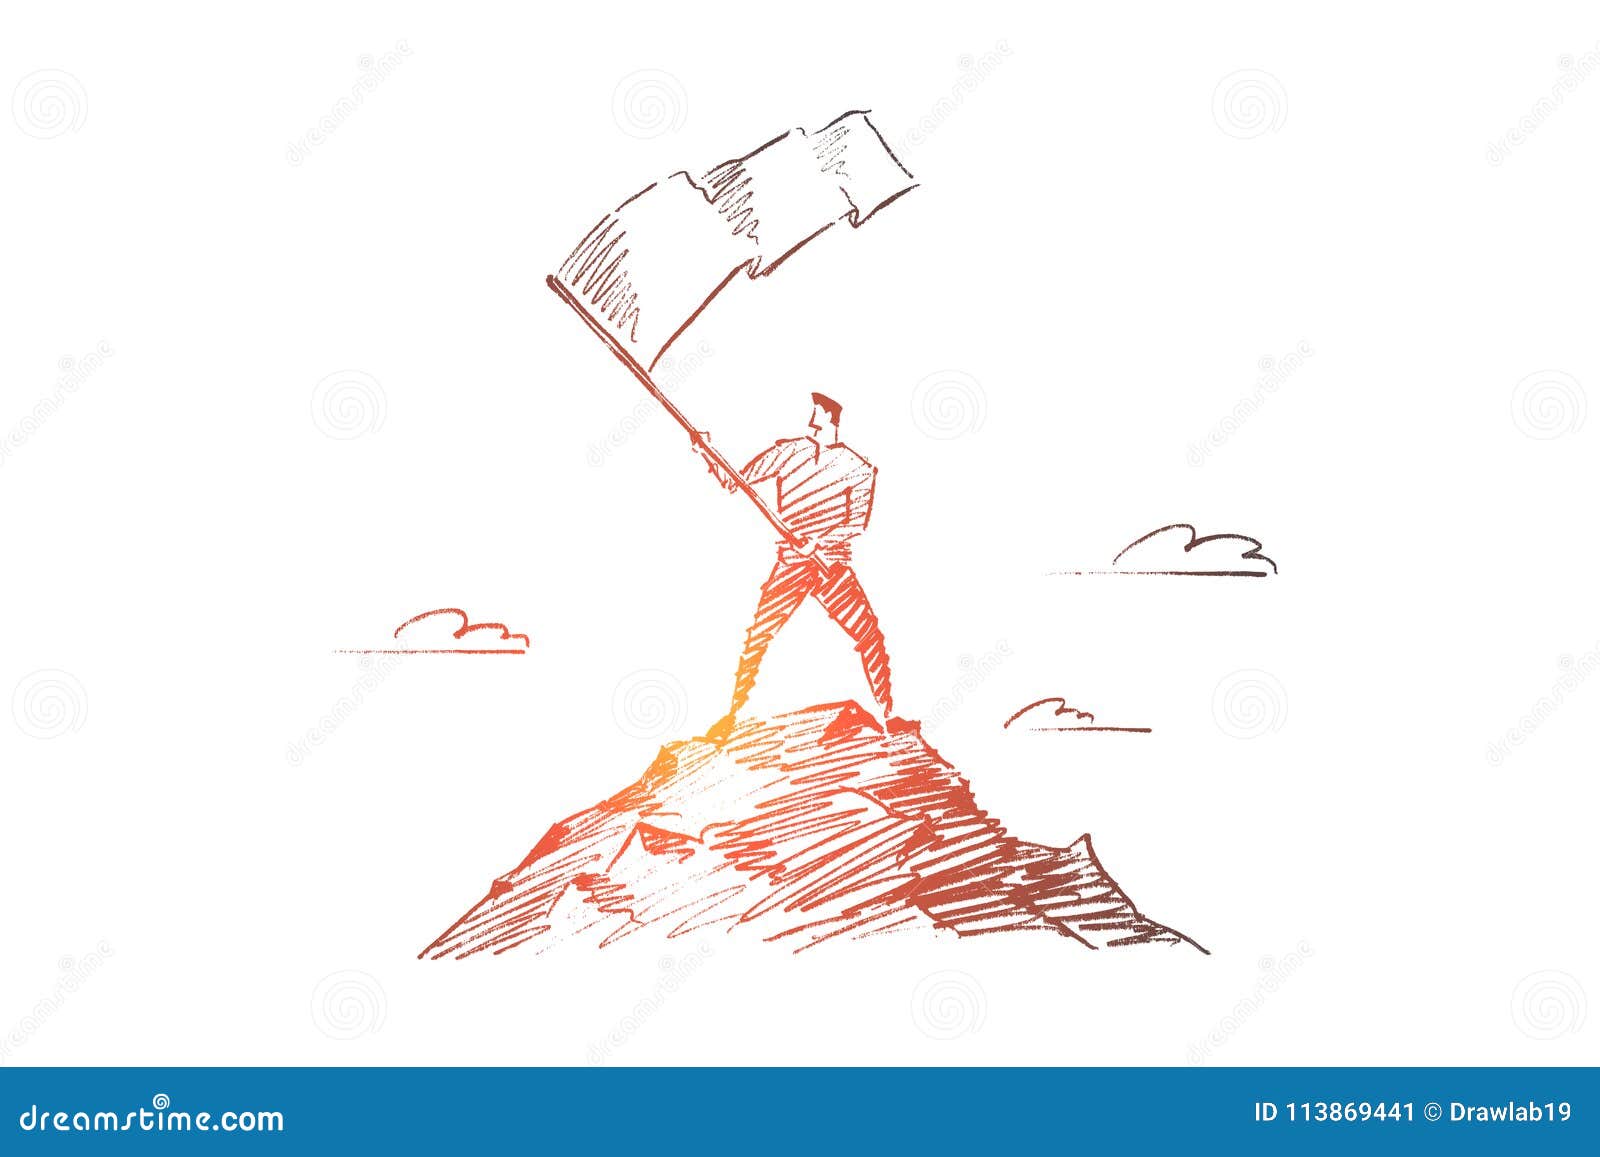 124416 Hill Drawing Images Stock Photos  Vectors  Shutterstock